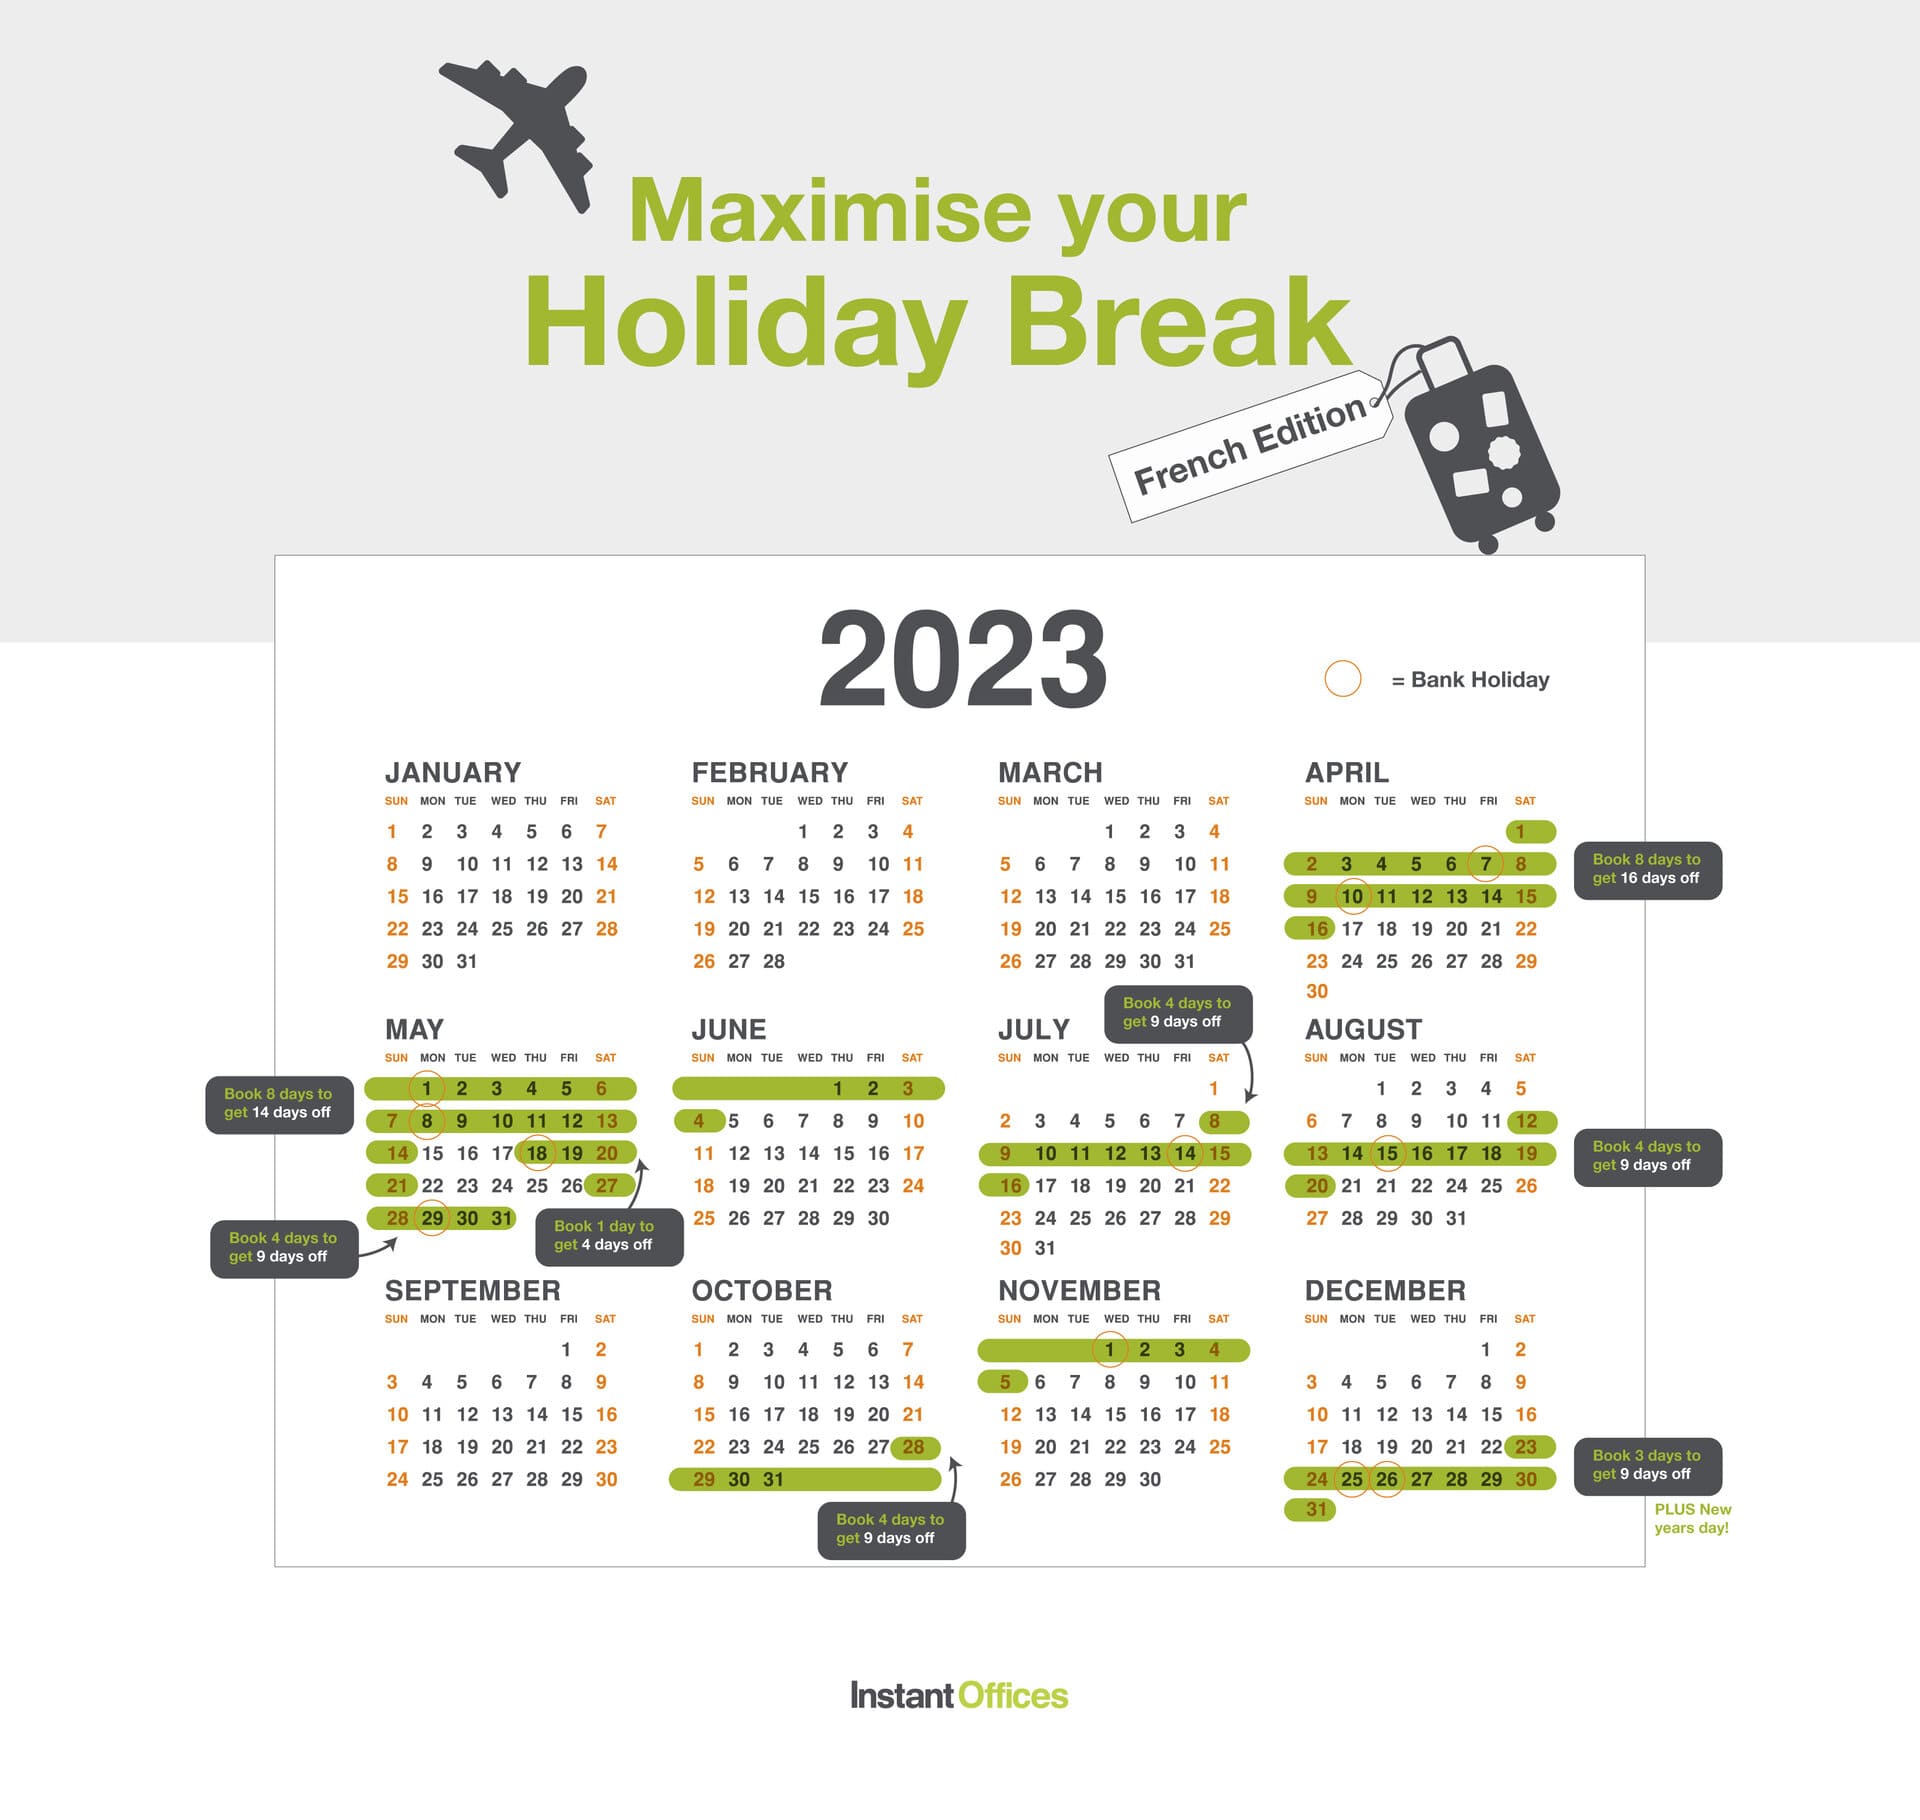 How to maximise annual leave in France in 2023 Instant Offices